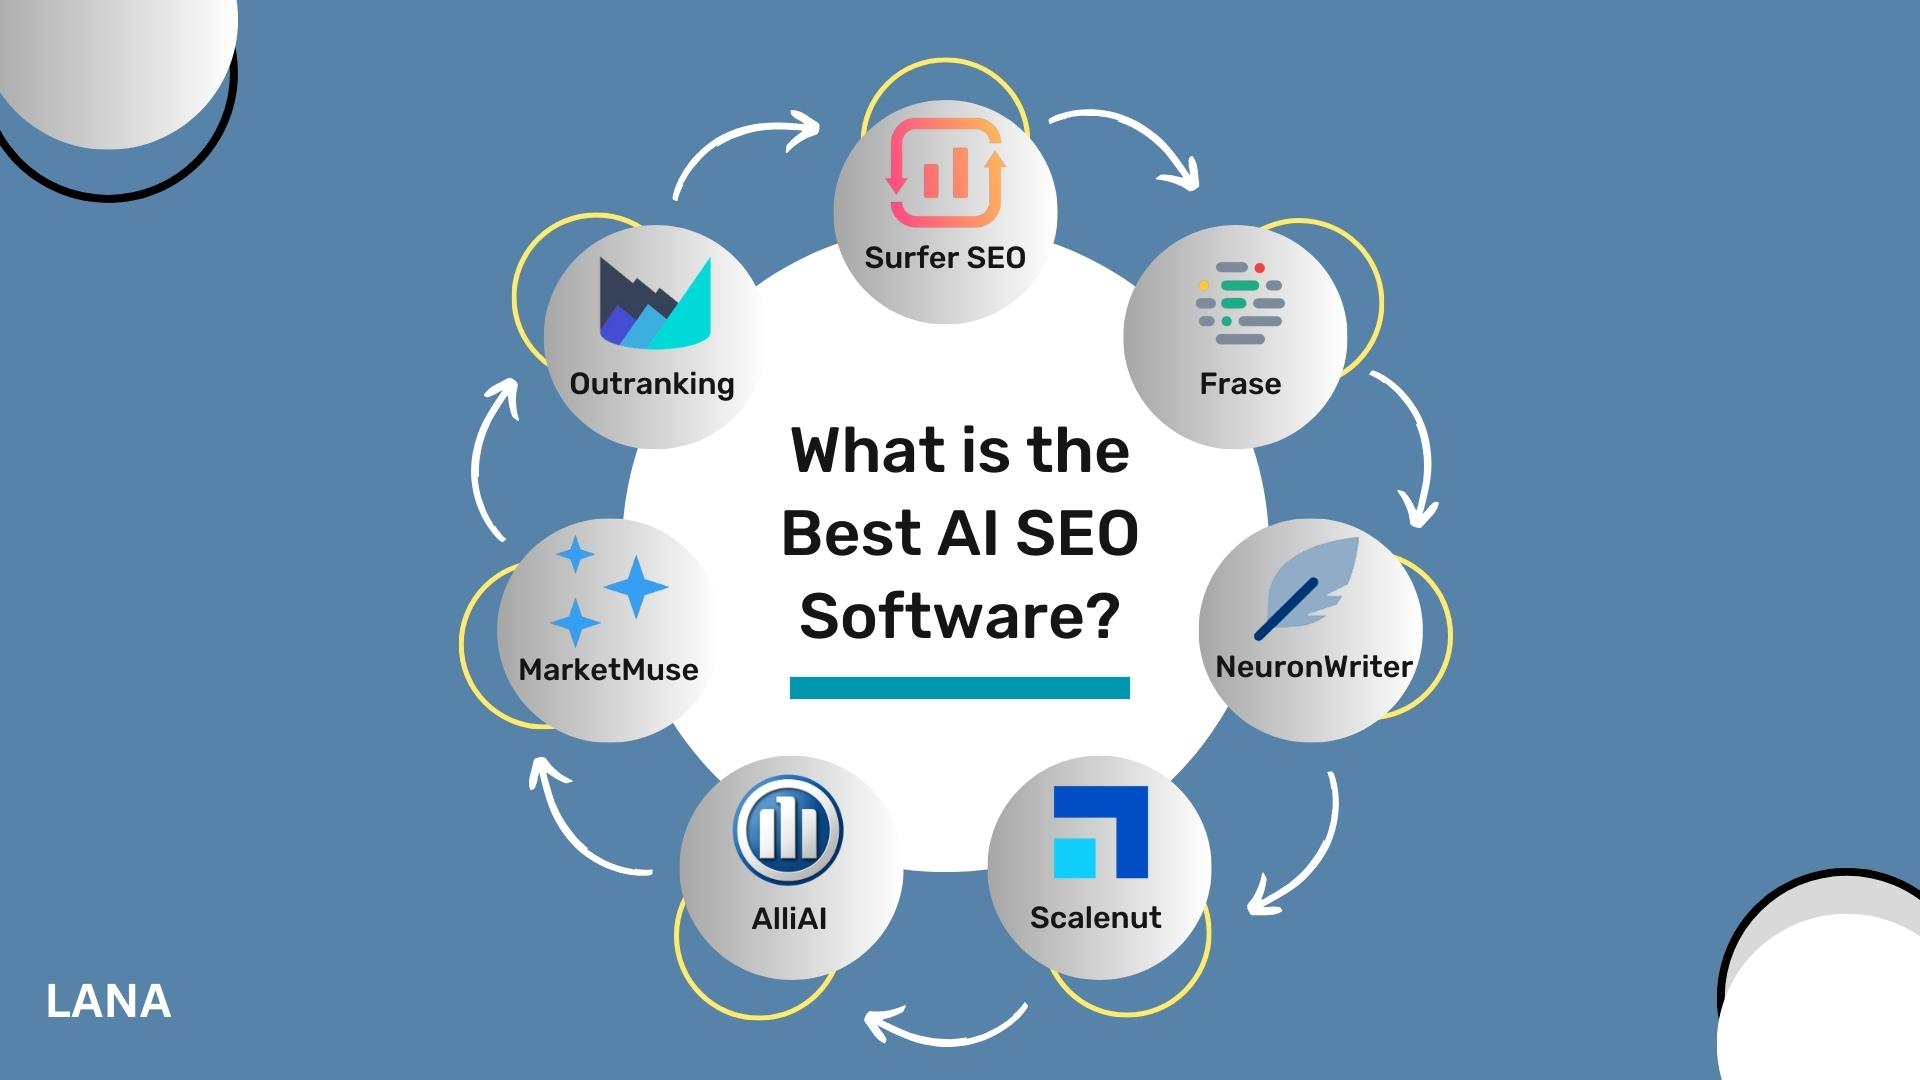 What is the Best AI SEO Software